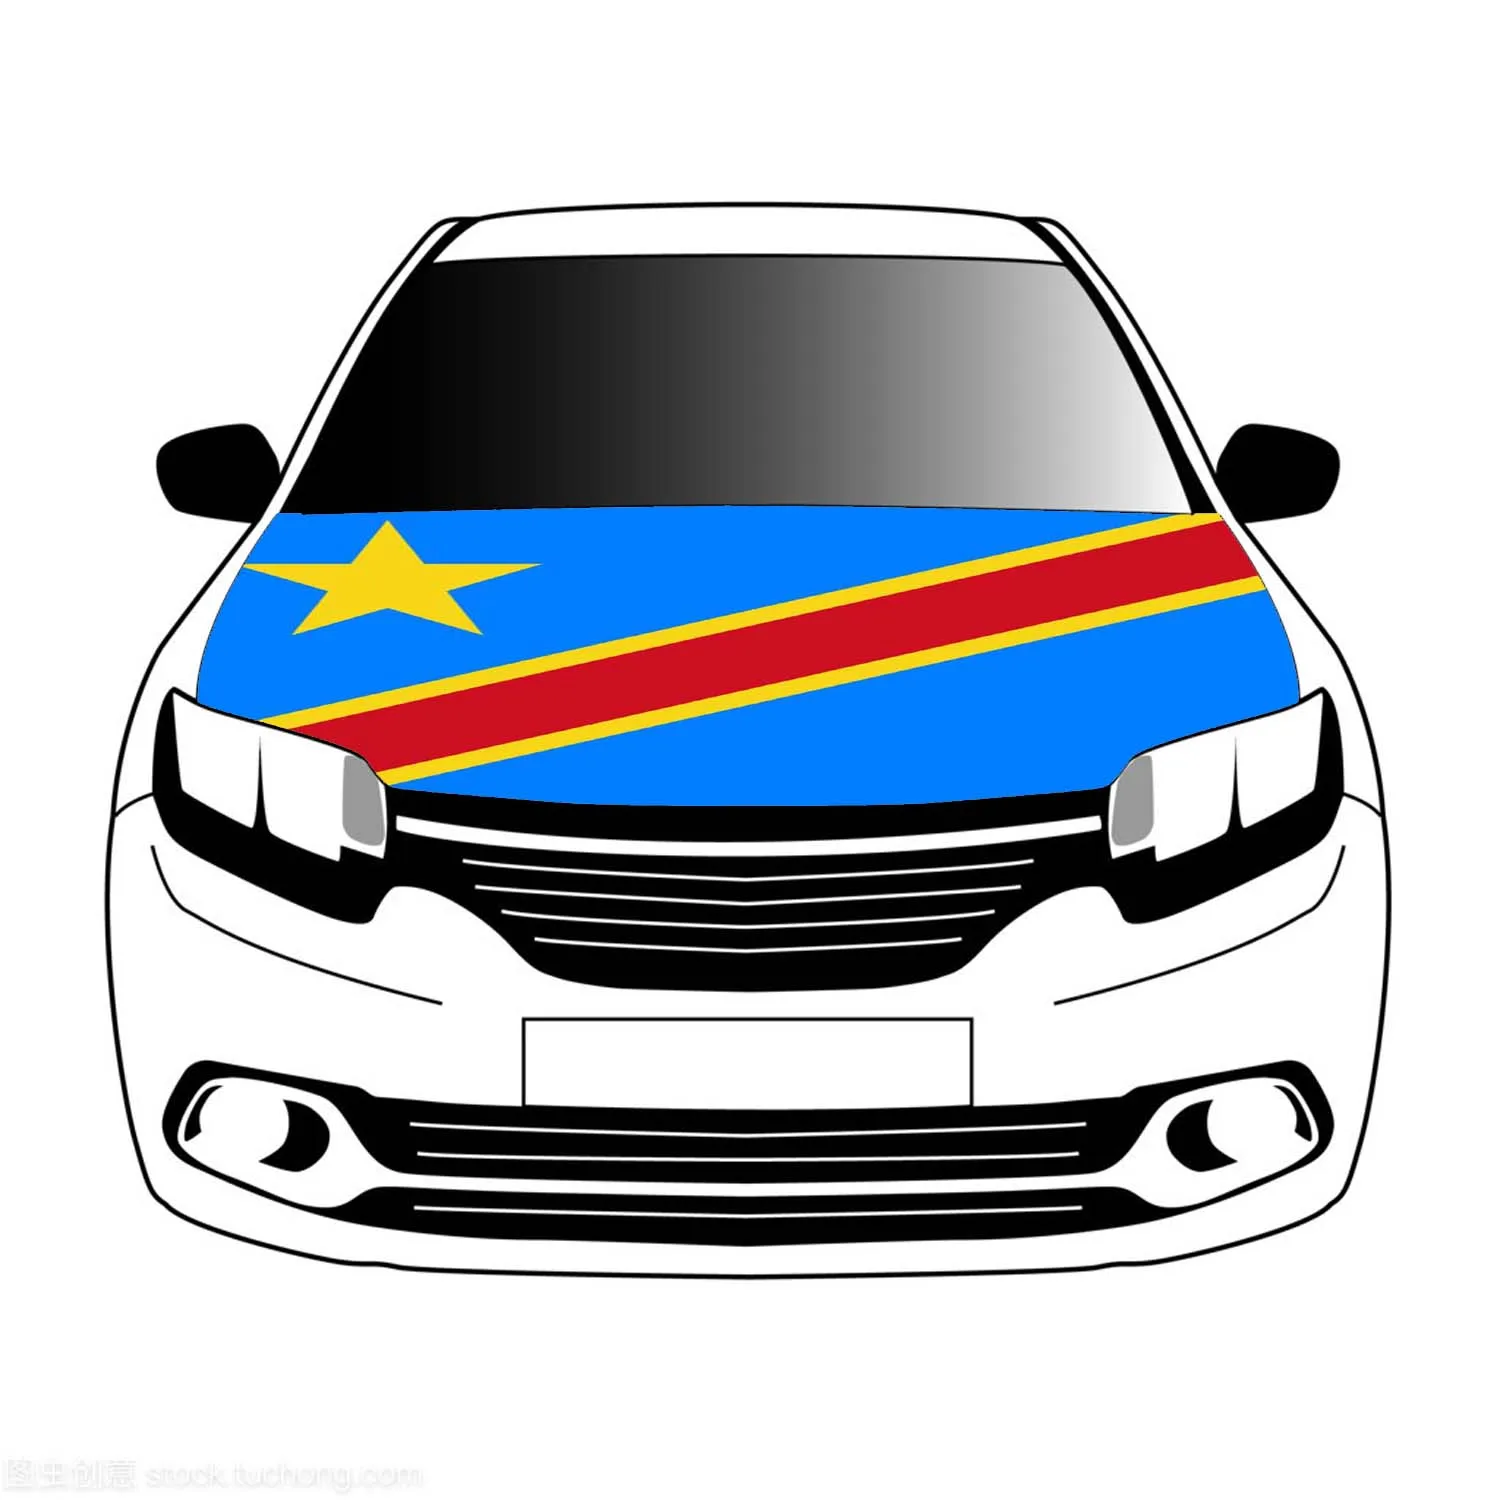 the Congo flags car Hood cover flags 3.3x5ft 100%polyester,car bonnet banner